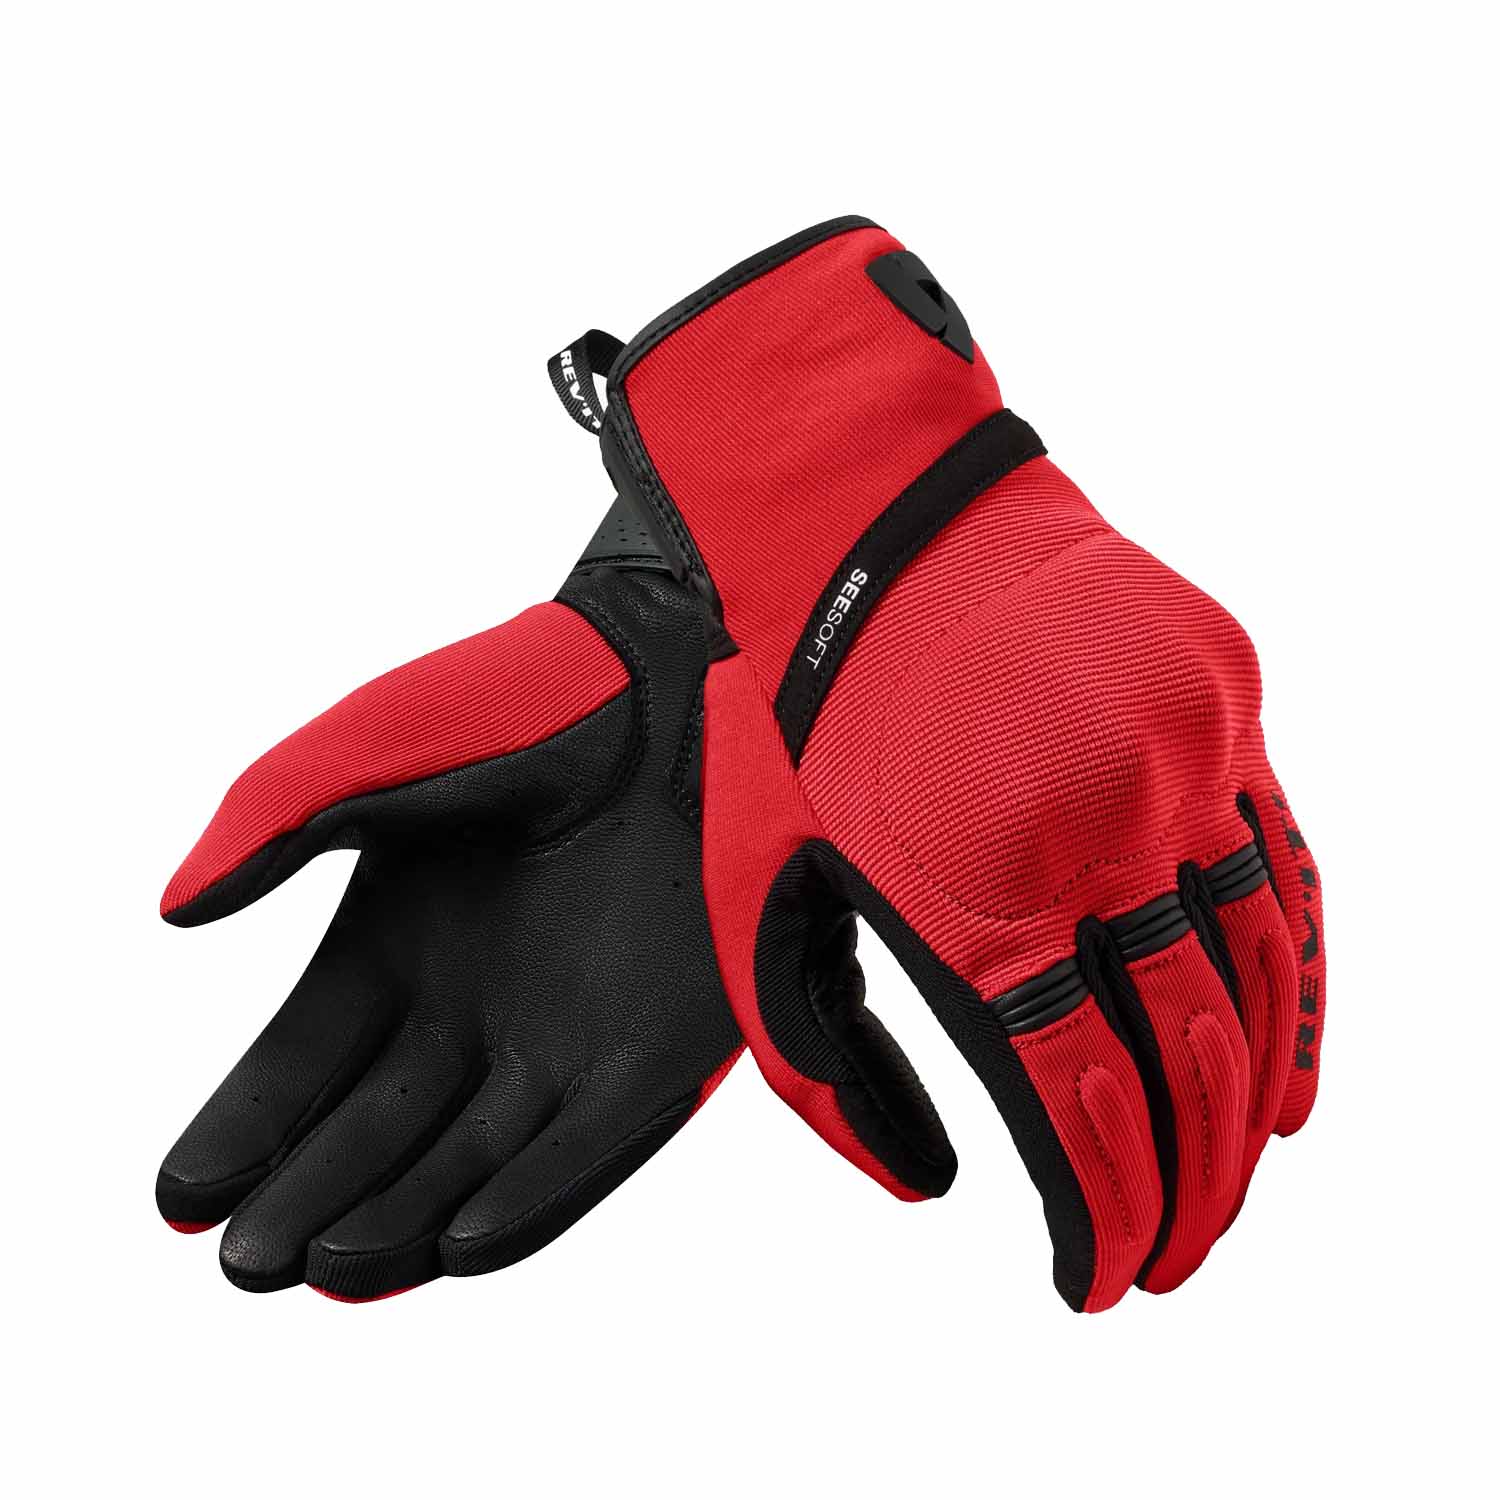 Image of REV'IT! Mosca 2 Gloves Red Black Talla S